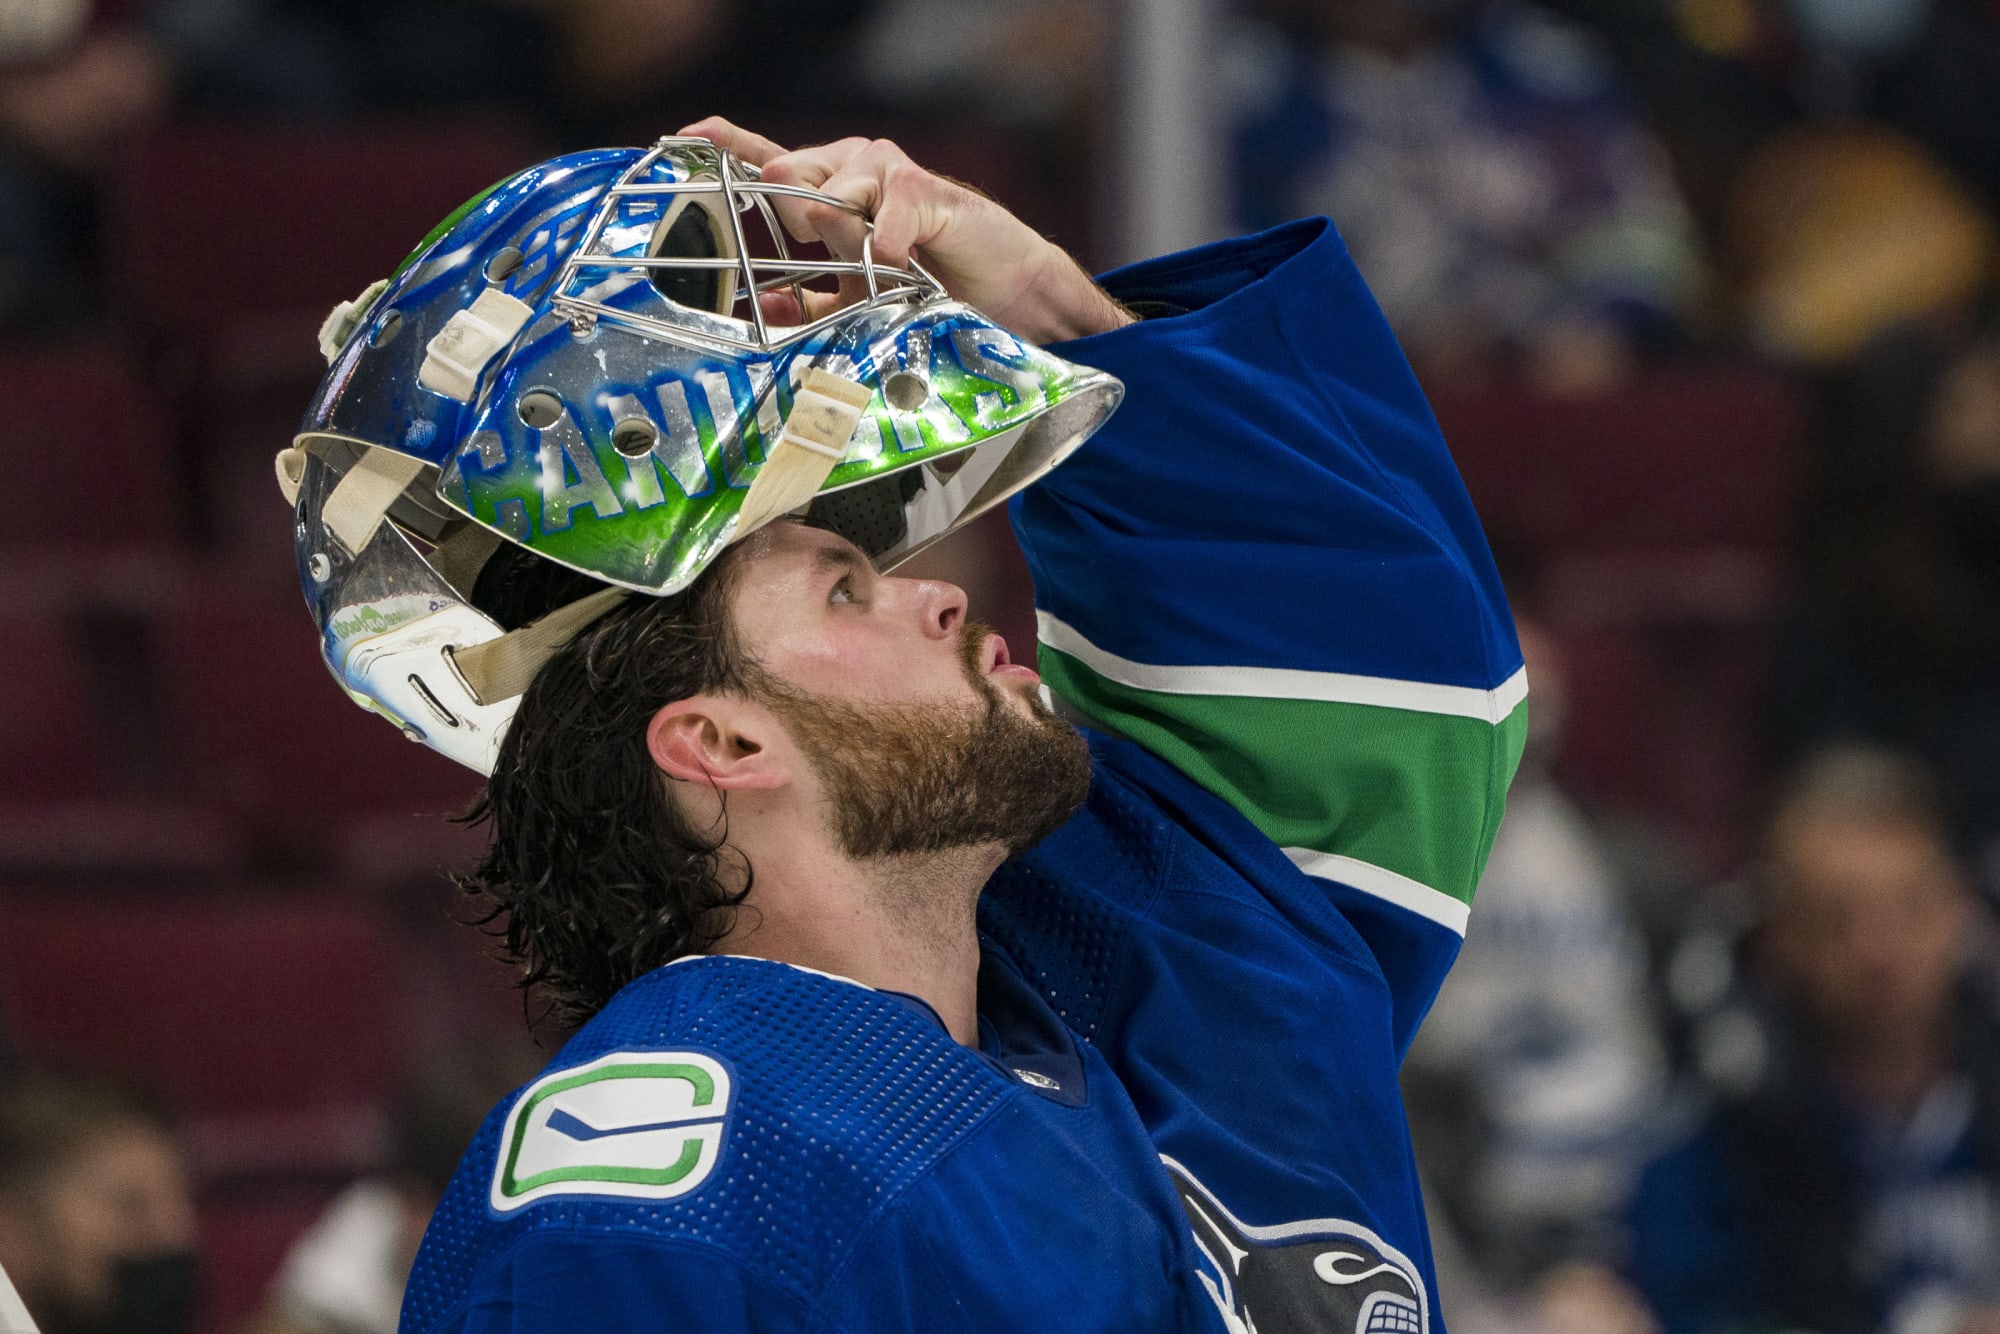 What should we expect in net for the Canucks next season?